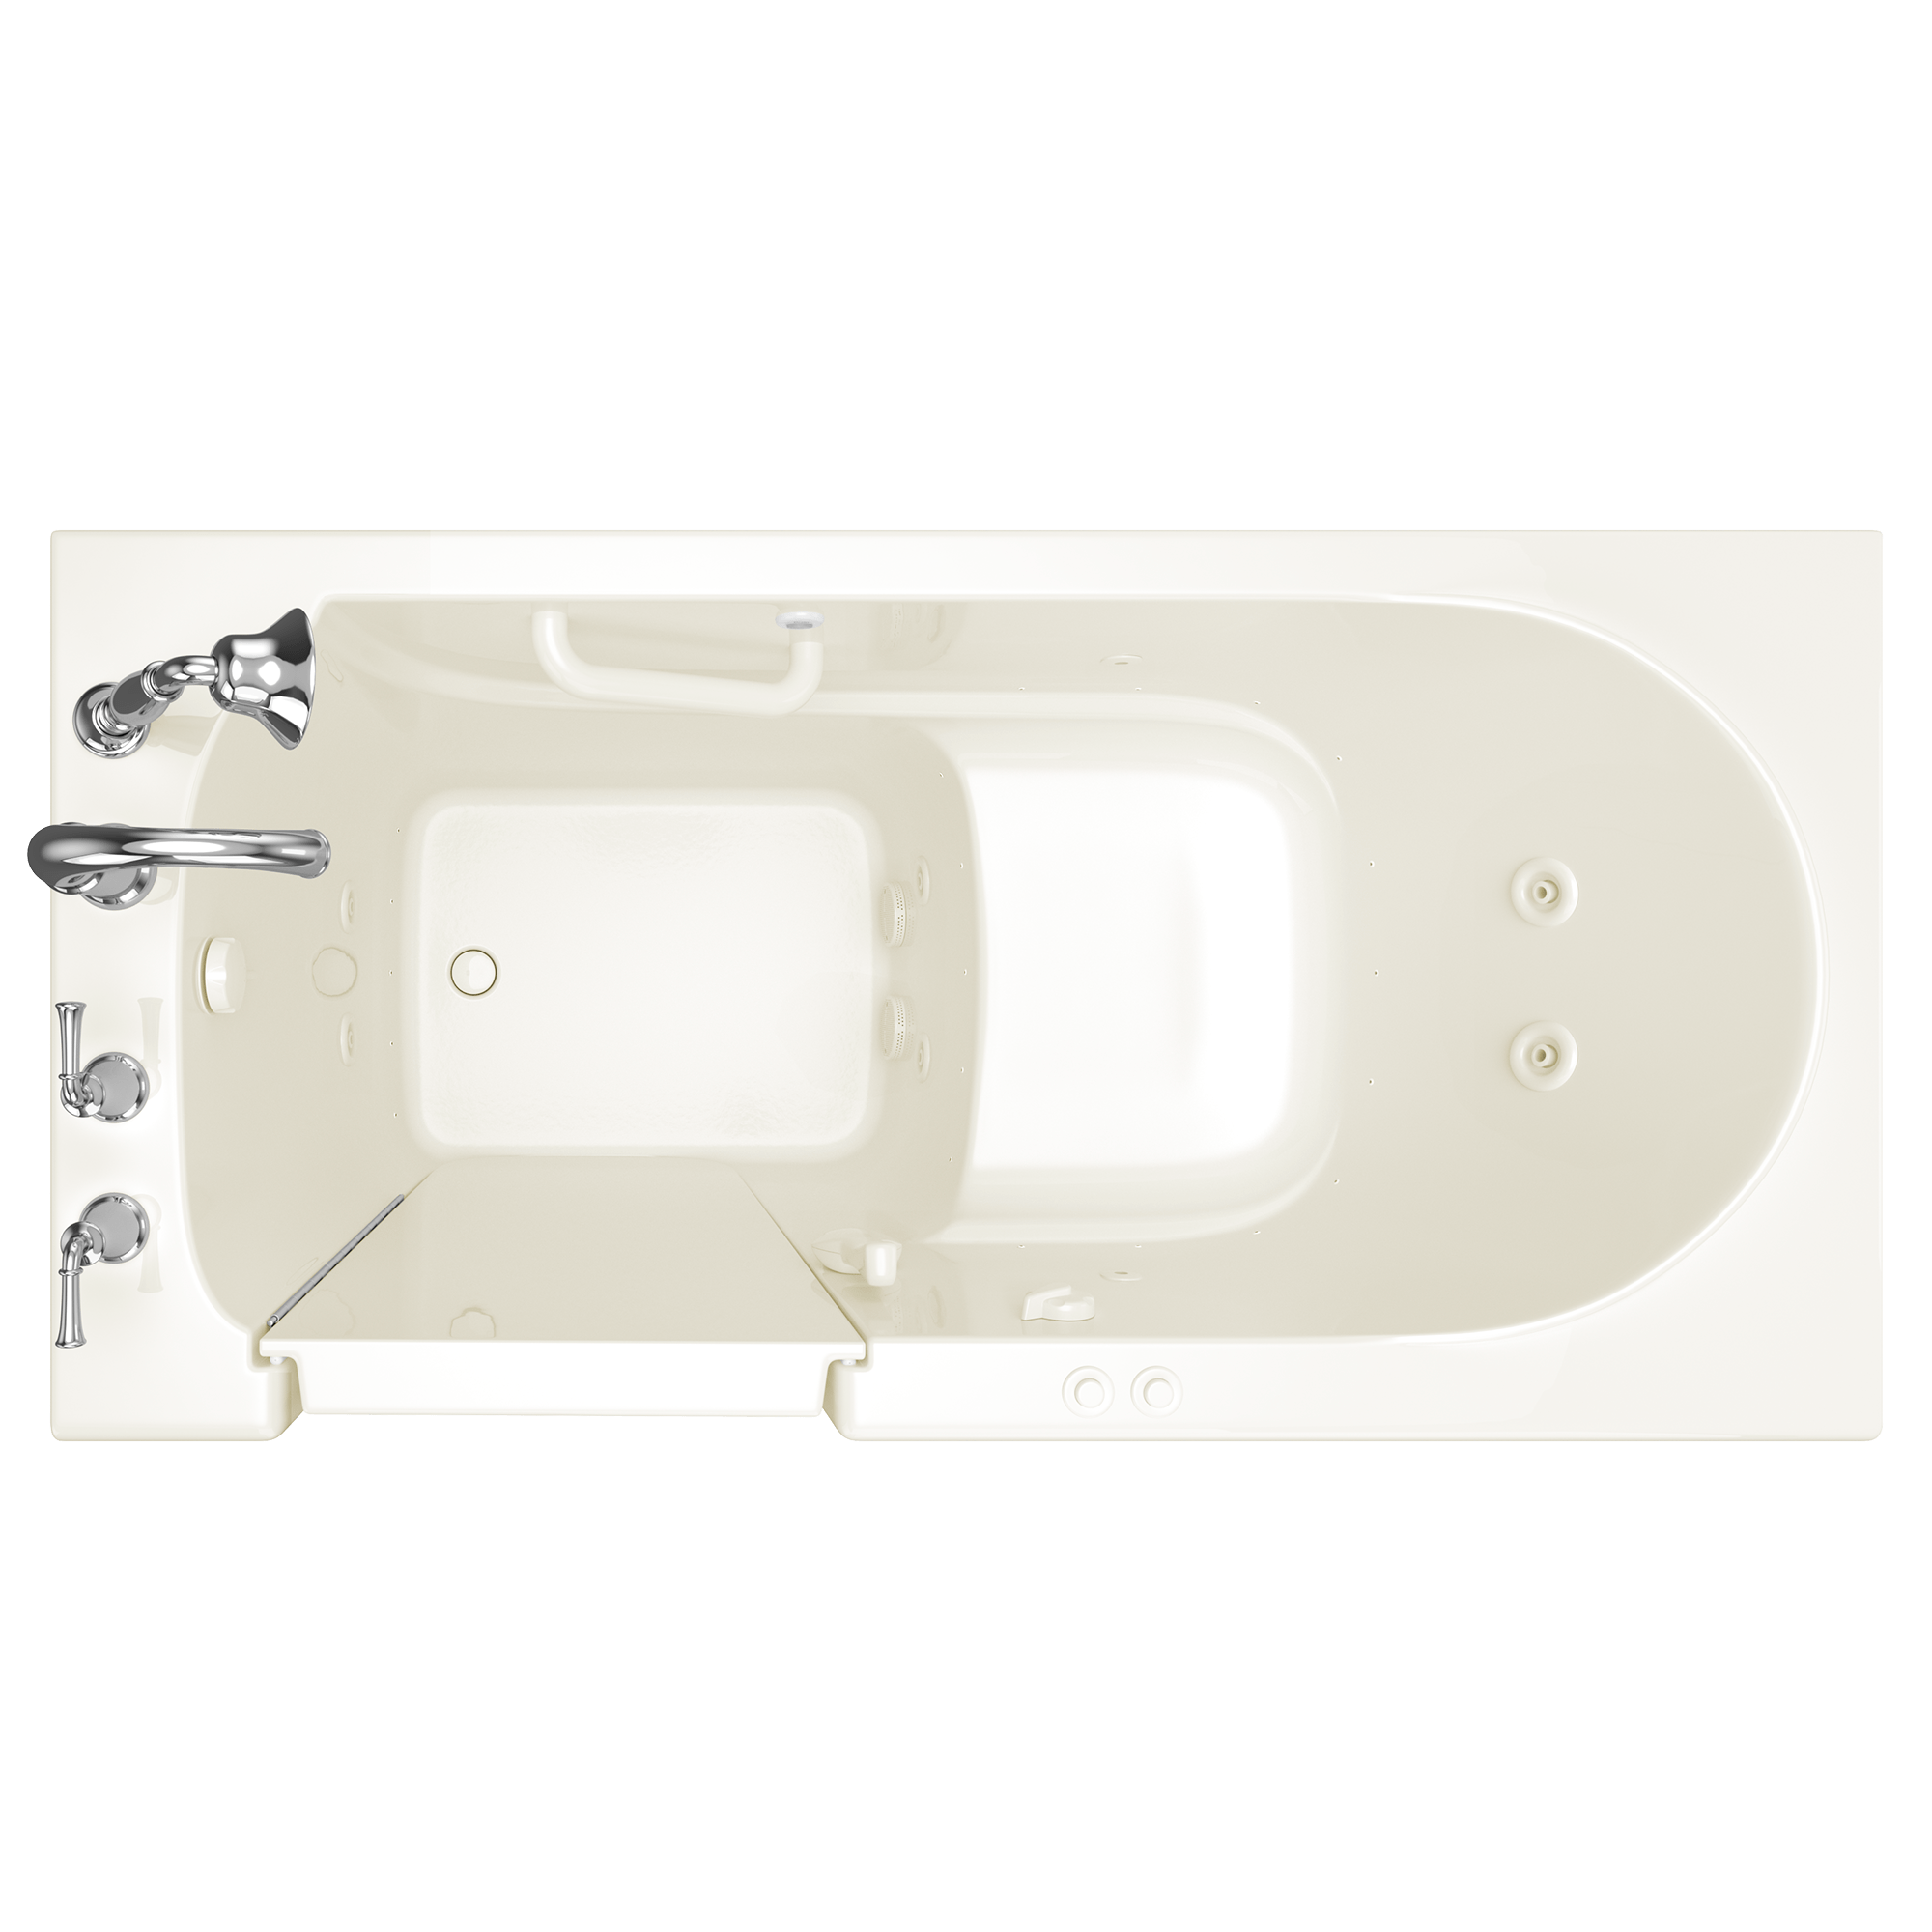 Gelcoat Value Series 30x60 Inch Walk-In Bathtub with Combination Air Spa and Whirlpool Massage System - Left Hand Door and Drain